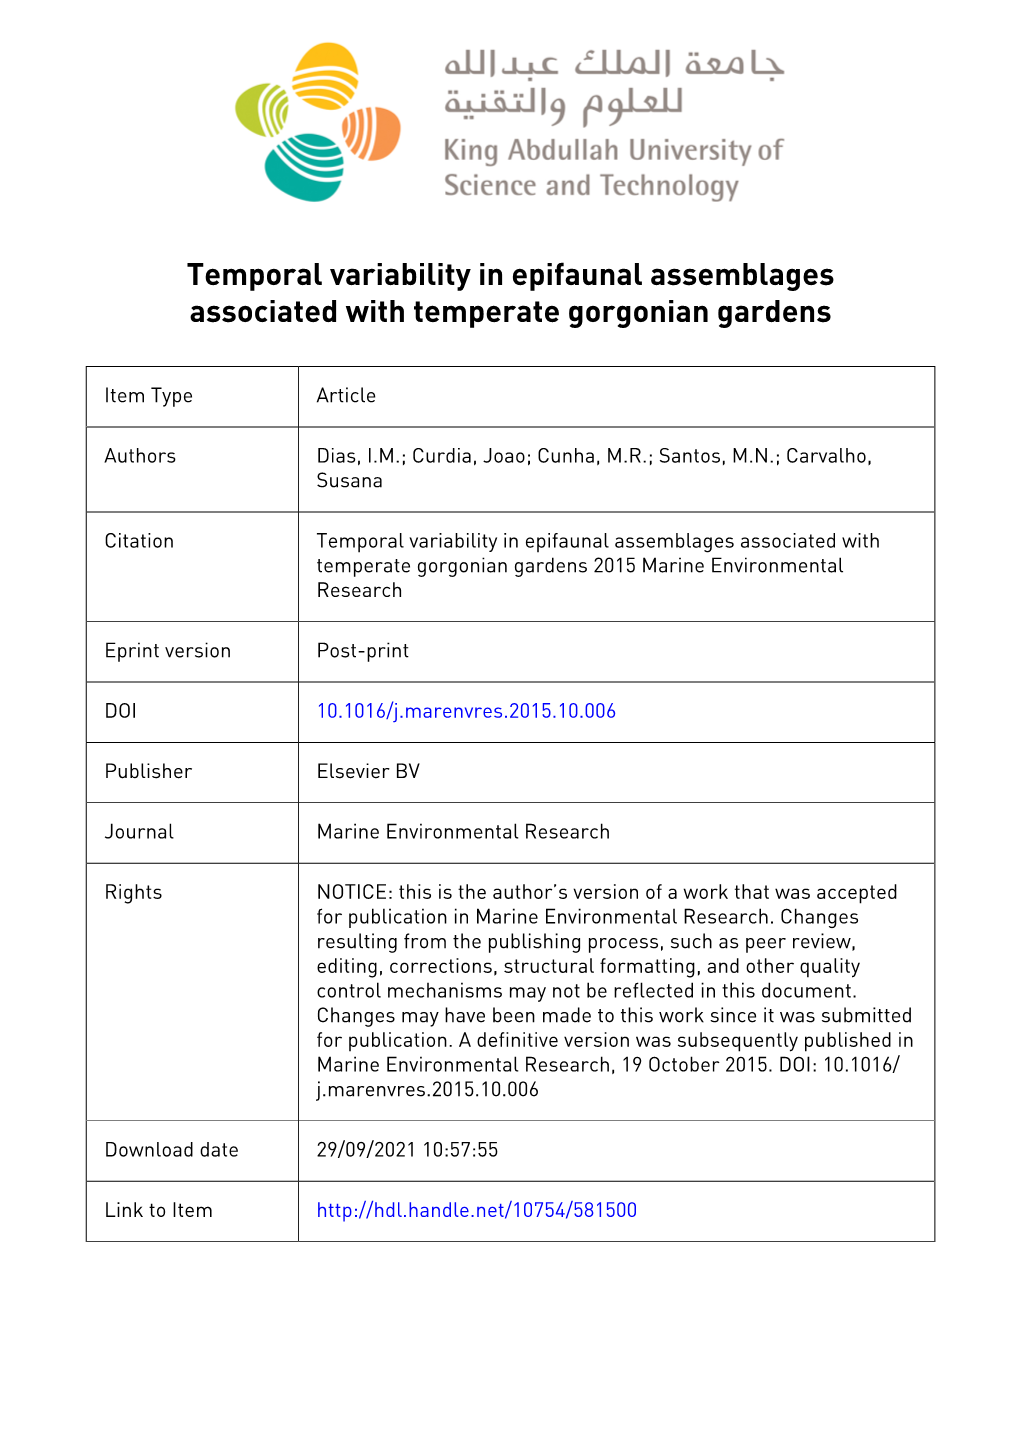 Temporal Variability in Epifaunal Assemblages Associated with Temperate Gorgonian Gardens